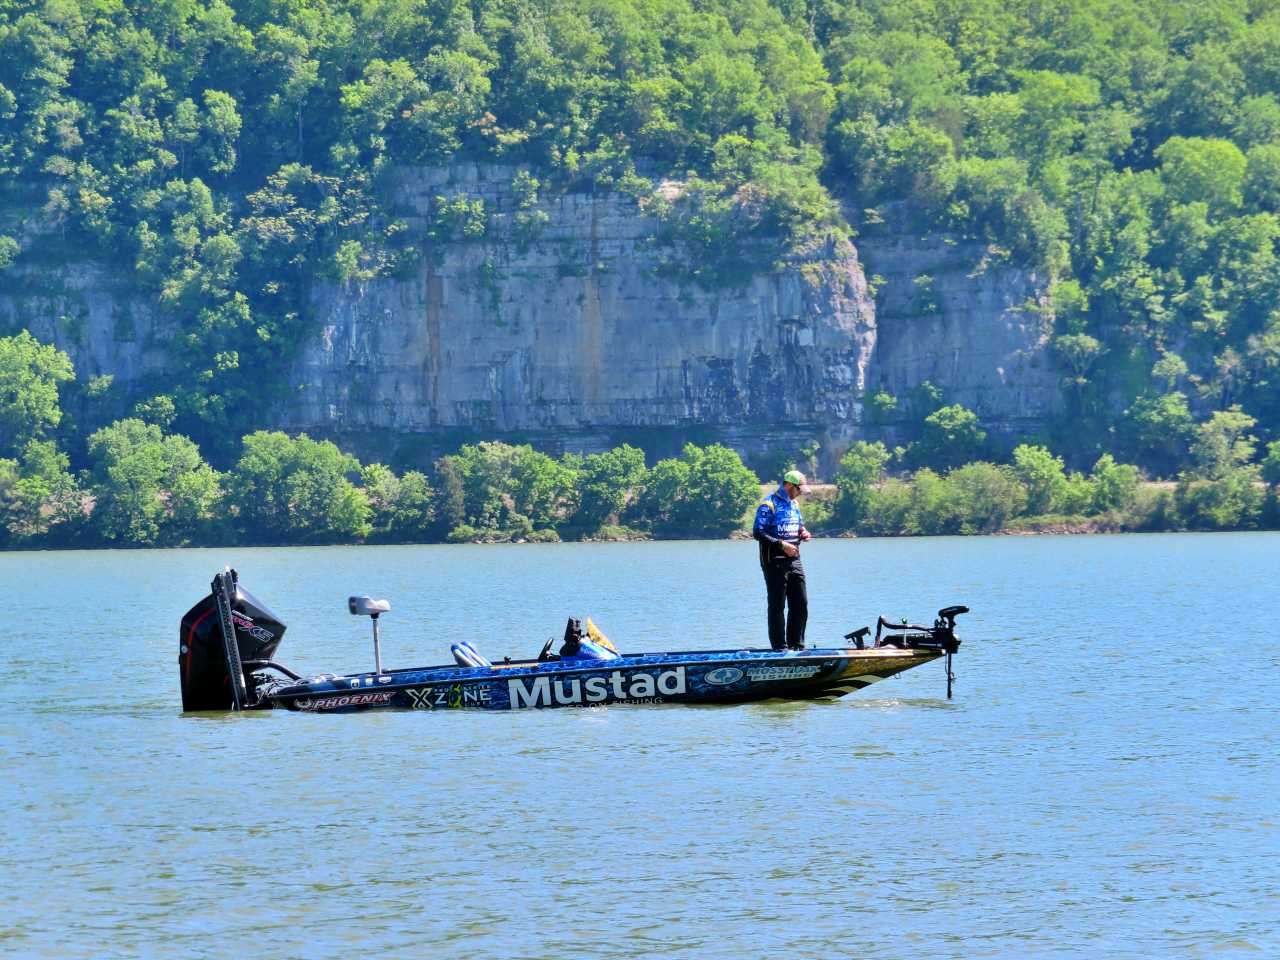 Cooler weather, active bass and two lakes meandering through Chattanooga, a top east Tennessee tourism destination. A weekend vacation here is the perfect fall getaway. Pack your suitcase and make your plans for prime fishing on Chickamauga and Nickajack lakes, both on the Tennessee River. 